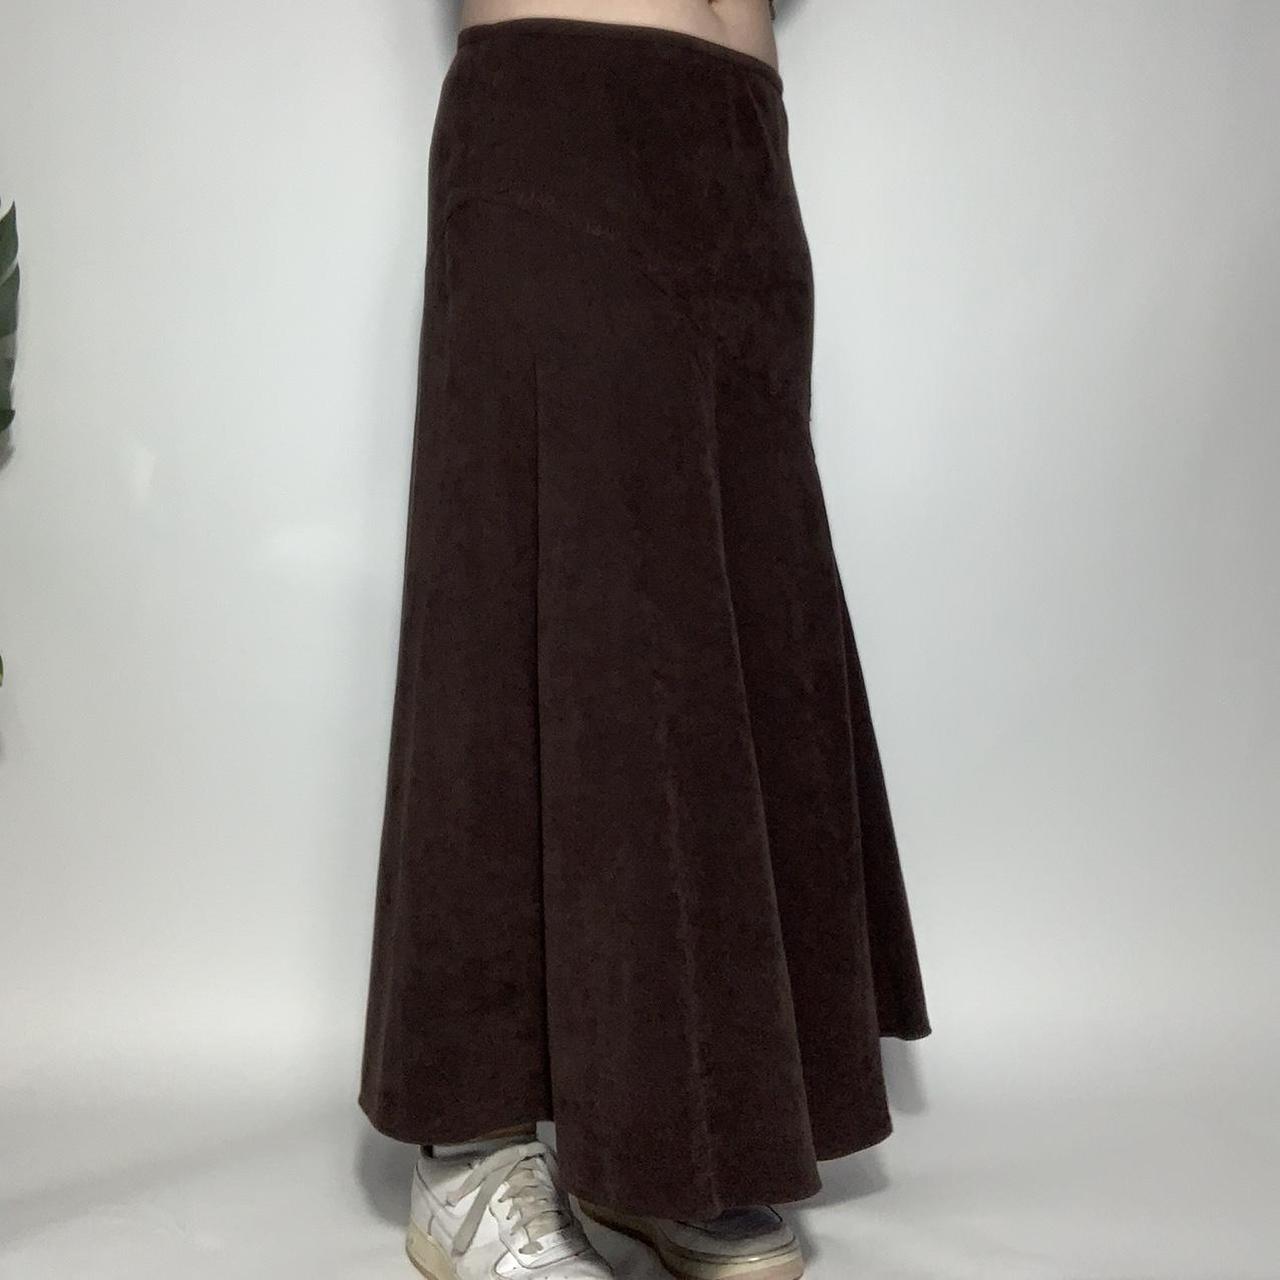 Vintage y2k flowy brown floral embroidered fairycore maxi skirt